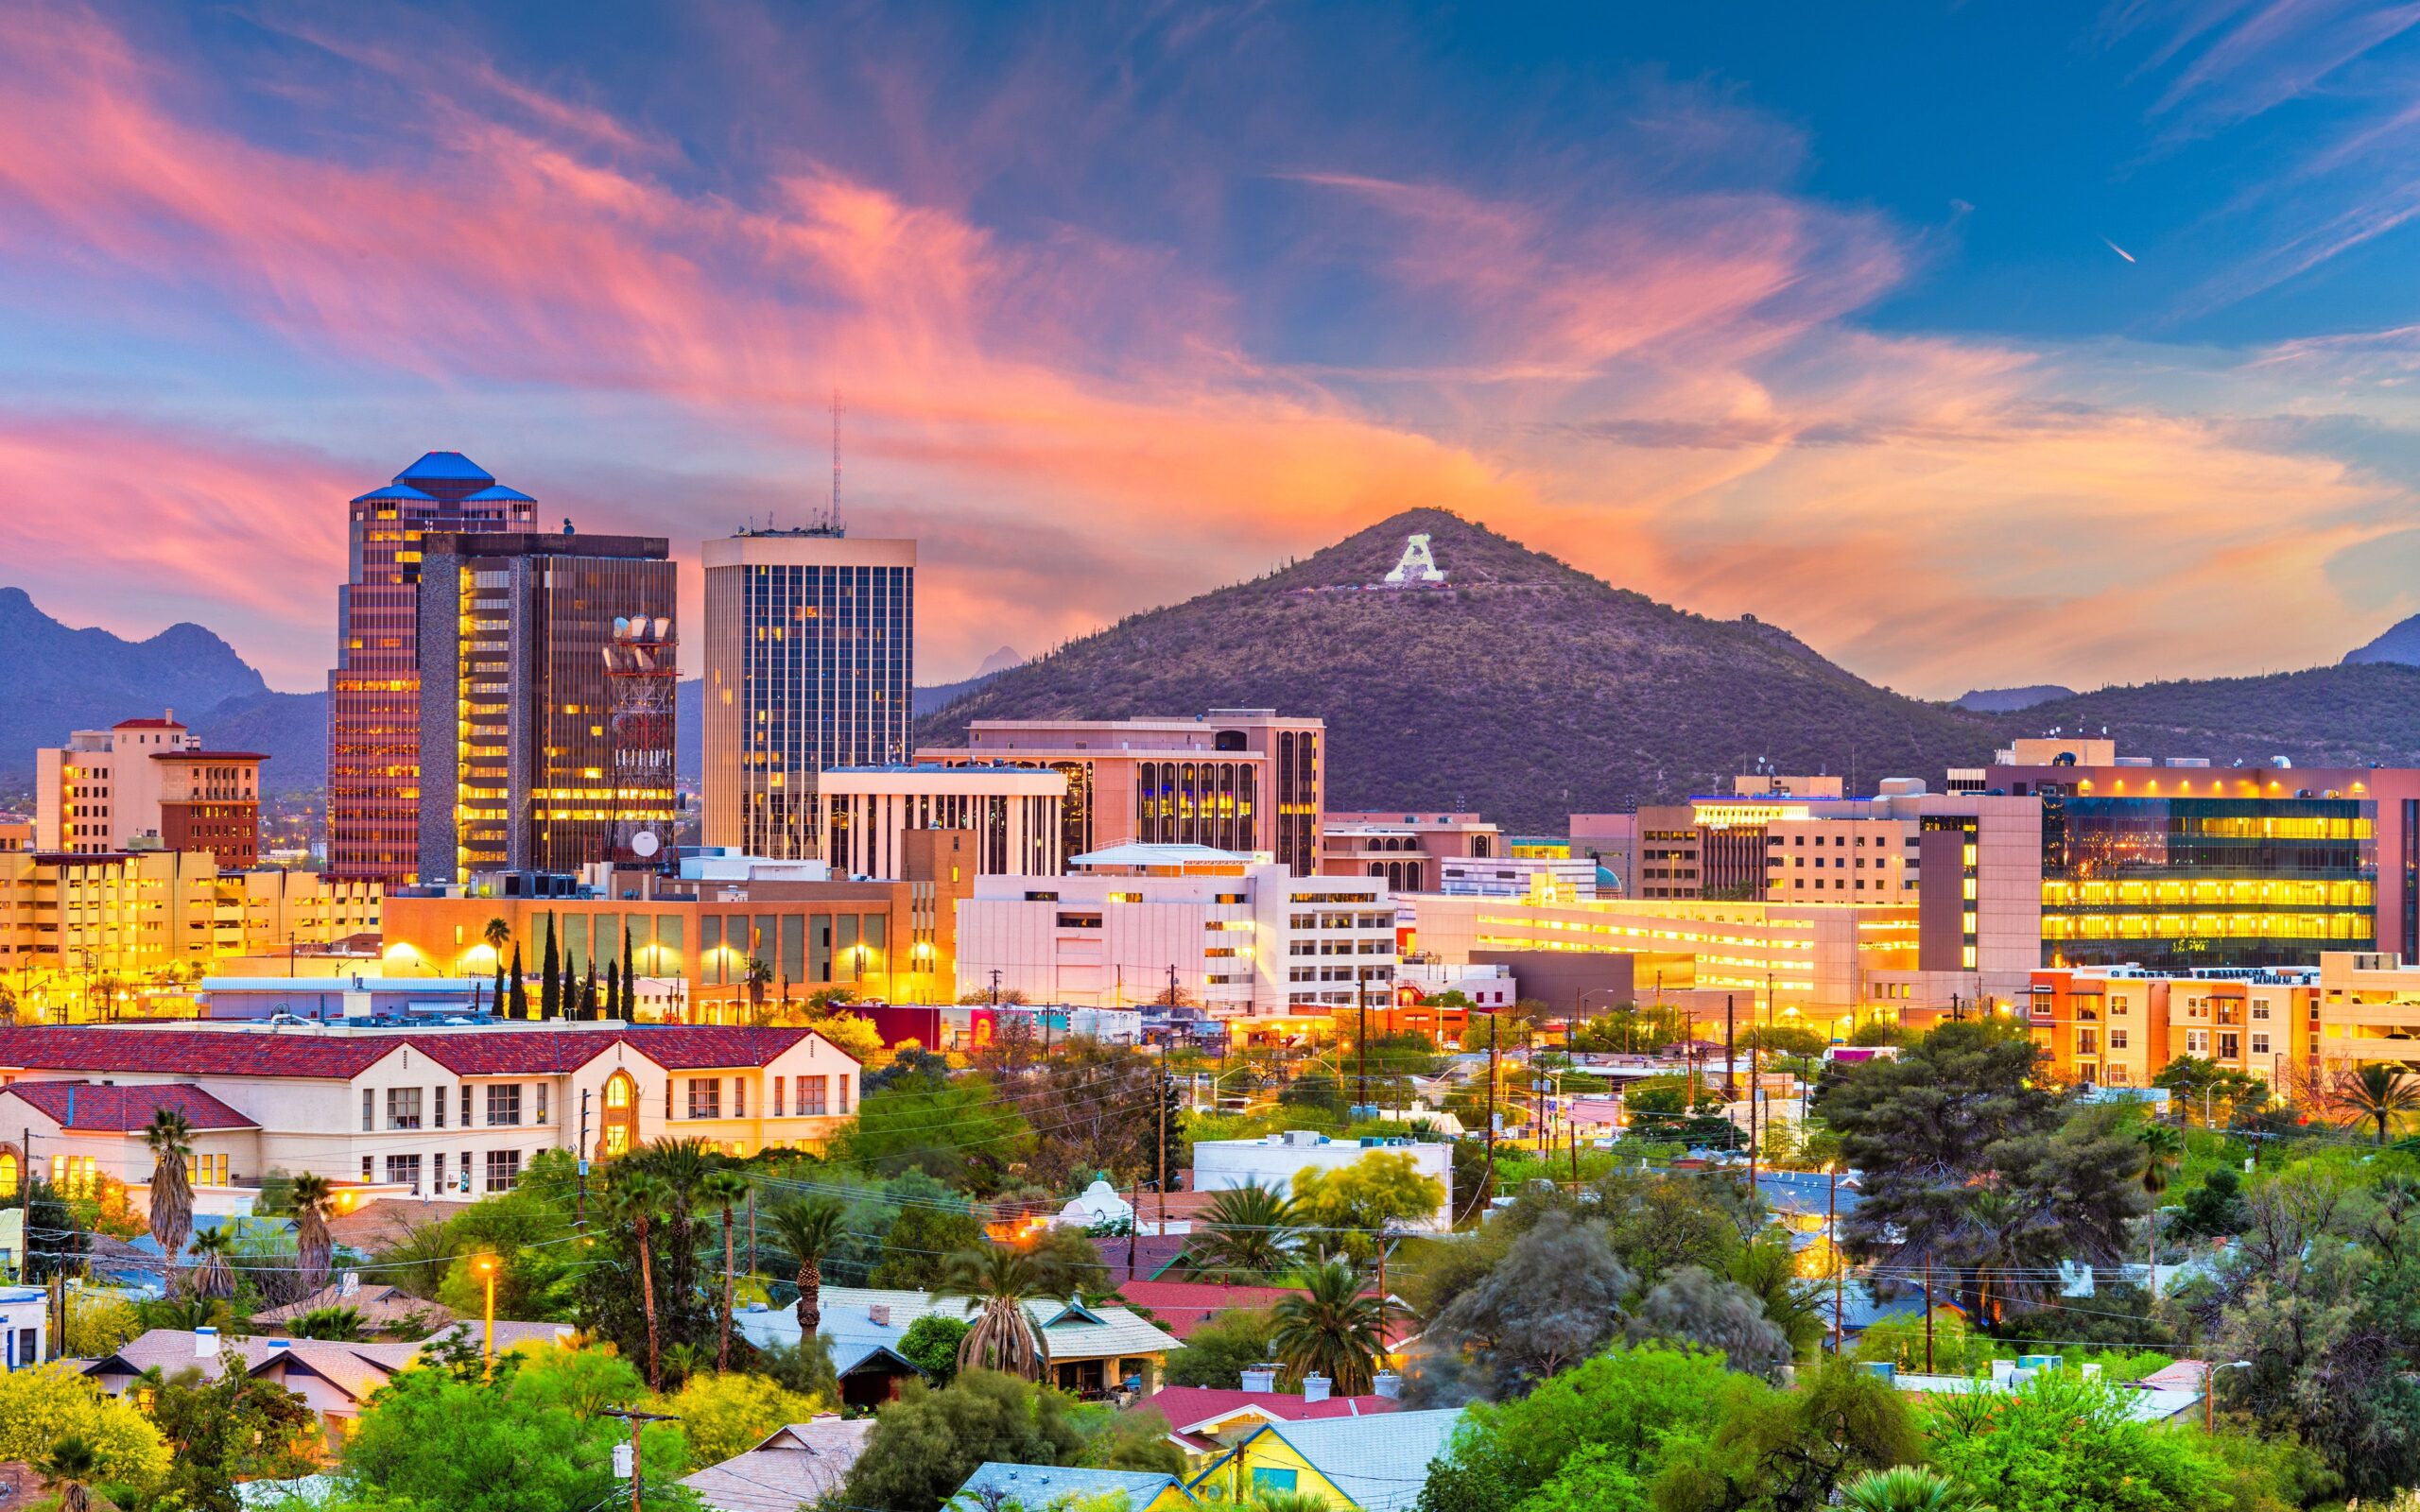 Protecting Arizona businesses means opposing PRO Act policies